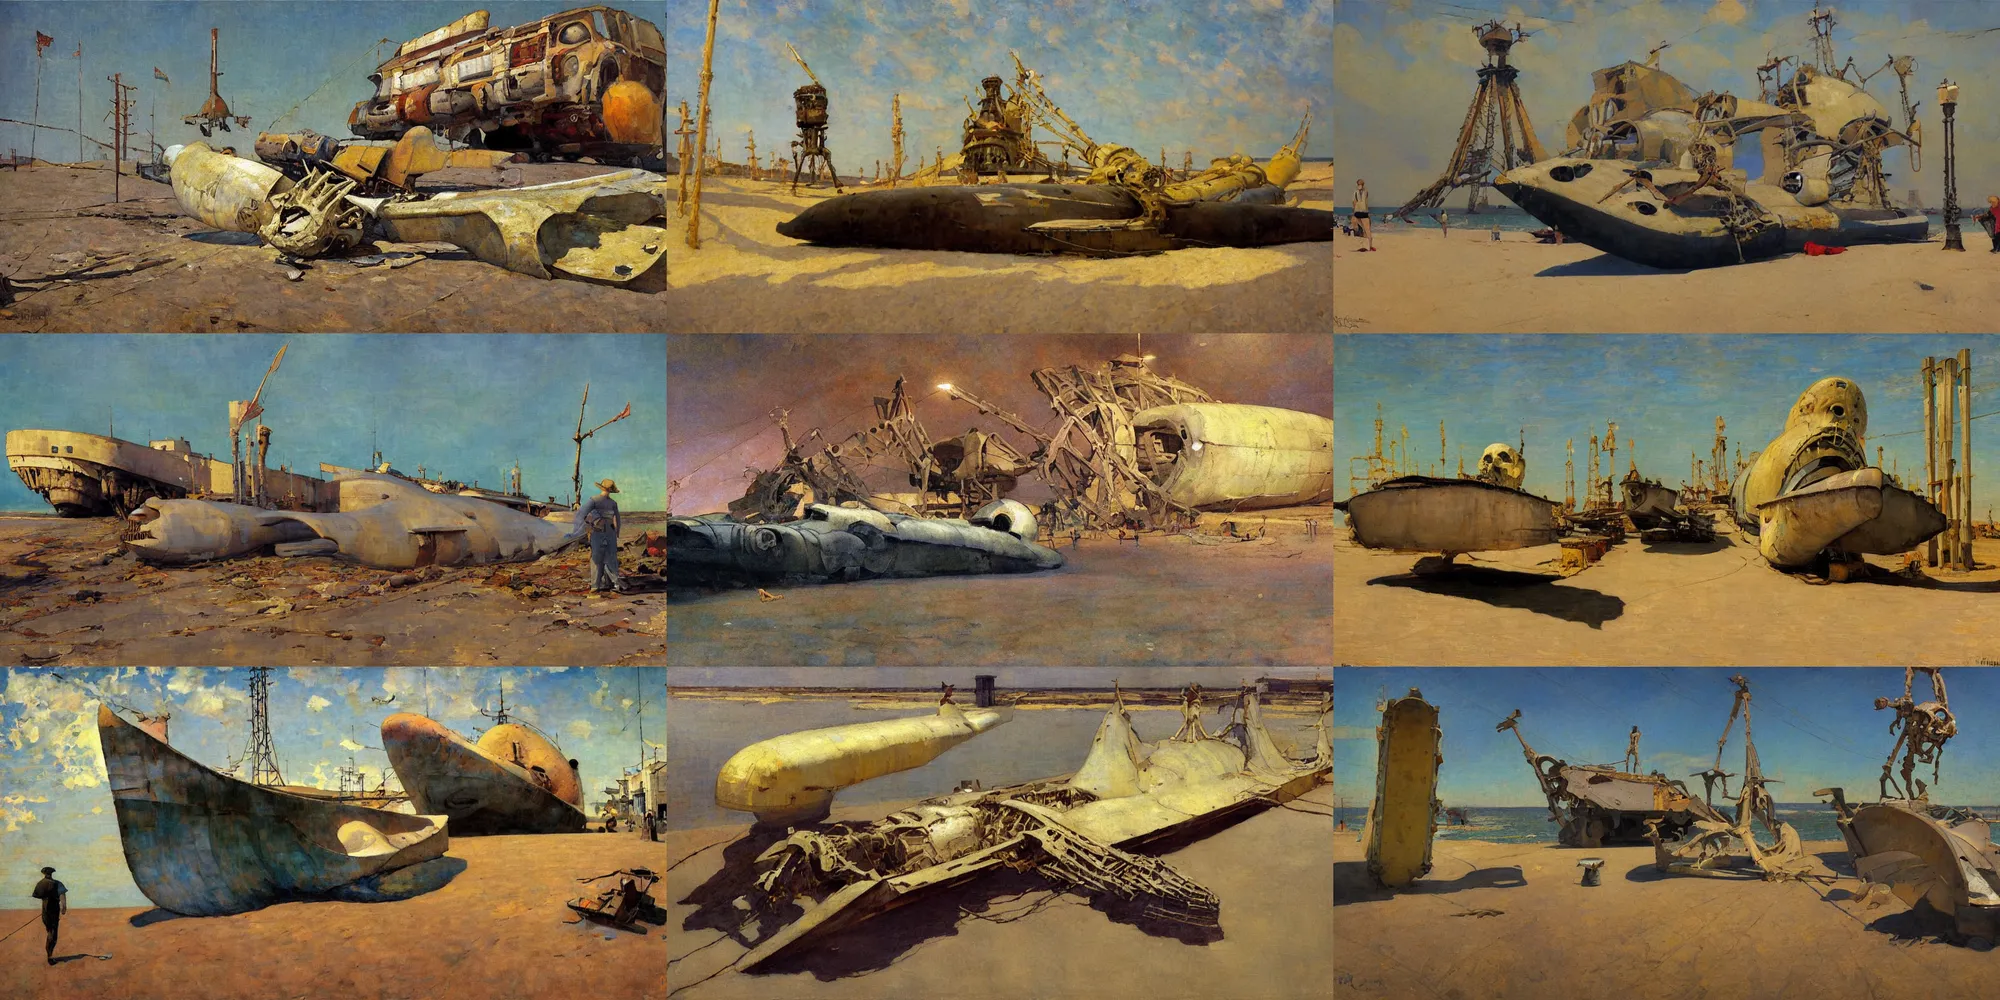 Prompt: painting by dean cornwell, ilya repin, nc wyeth painting, ultra wide, vanishing point, 3 d perspective, colossal beached nuclear submarine skeleton, white machinery, giant shoe, nasa, liquid gold, gold leaf, up close, beaching, rust, midnight, junk town, makeshift house, colorful lightbulb festoon lights, telephone pole